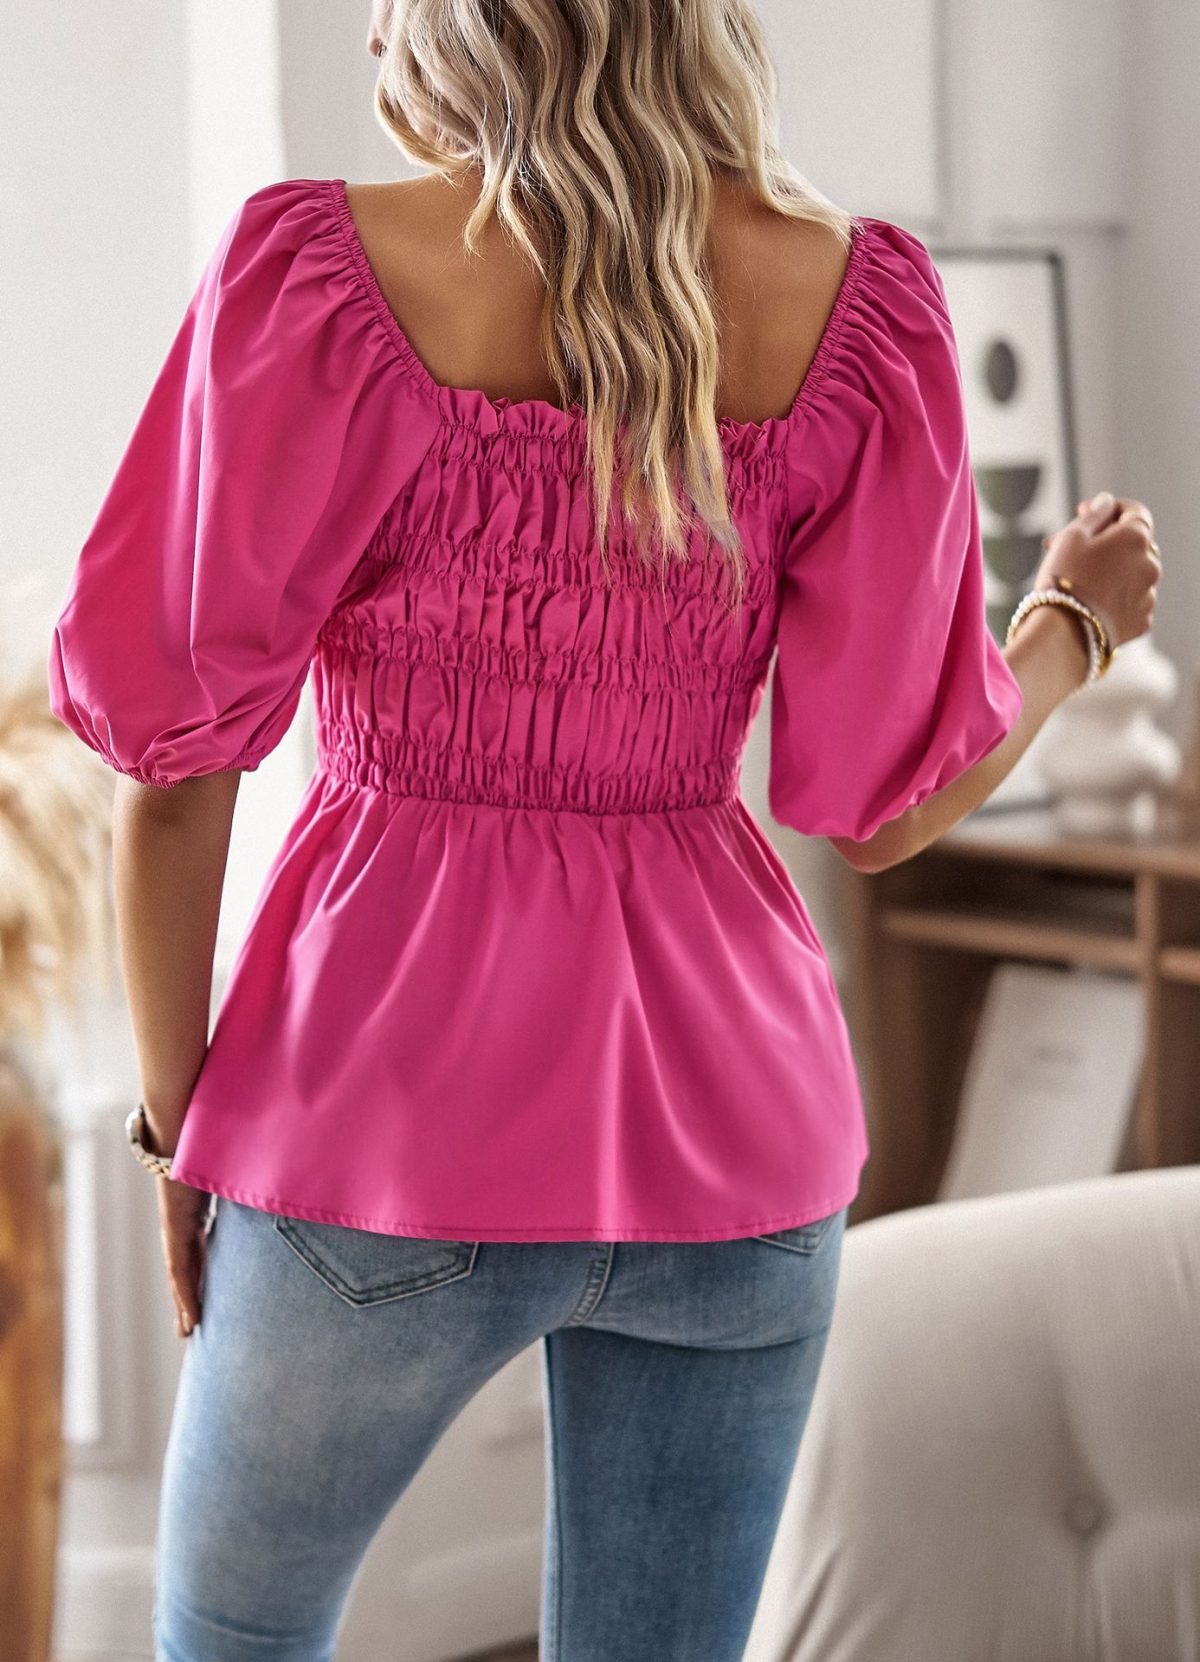 Waist Tight Slimming French Square Collar Top in Blouses & Shirts